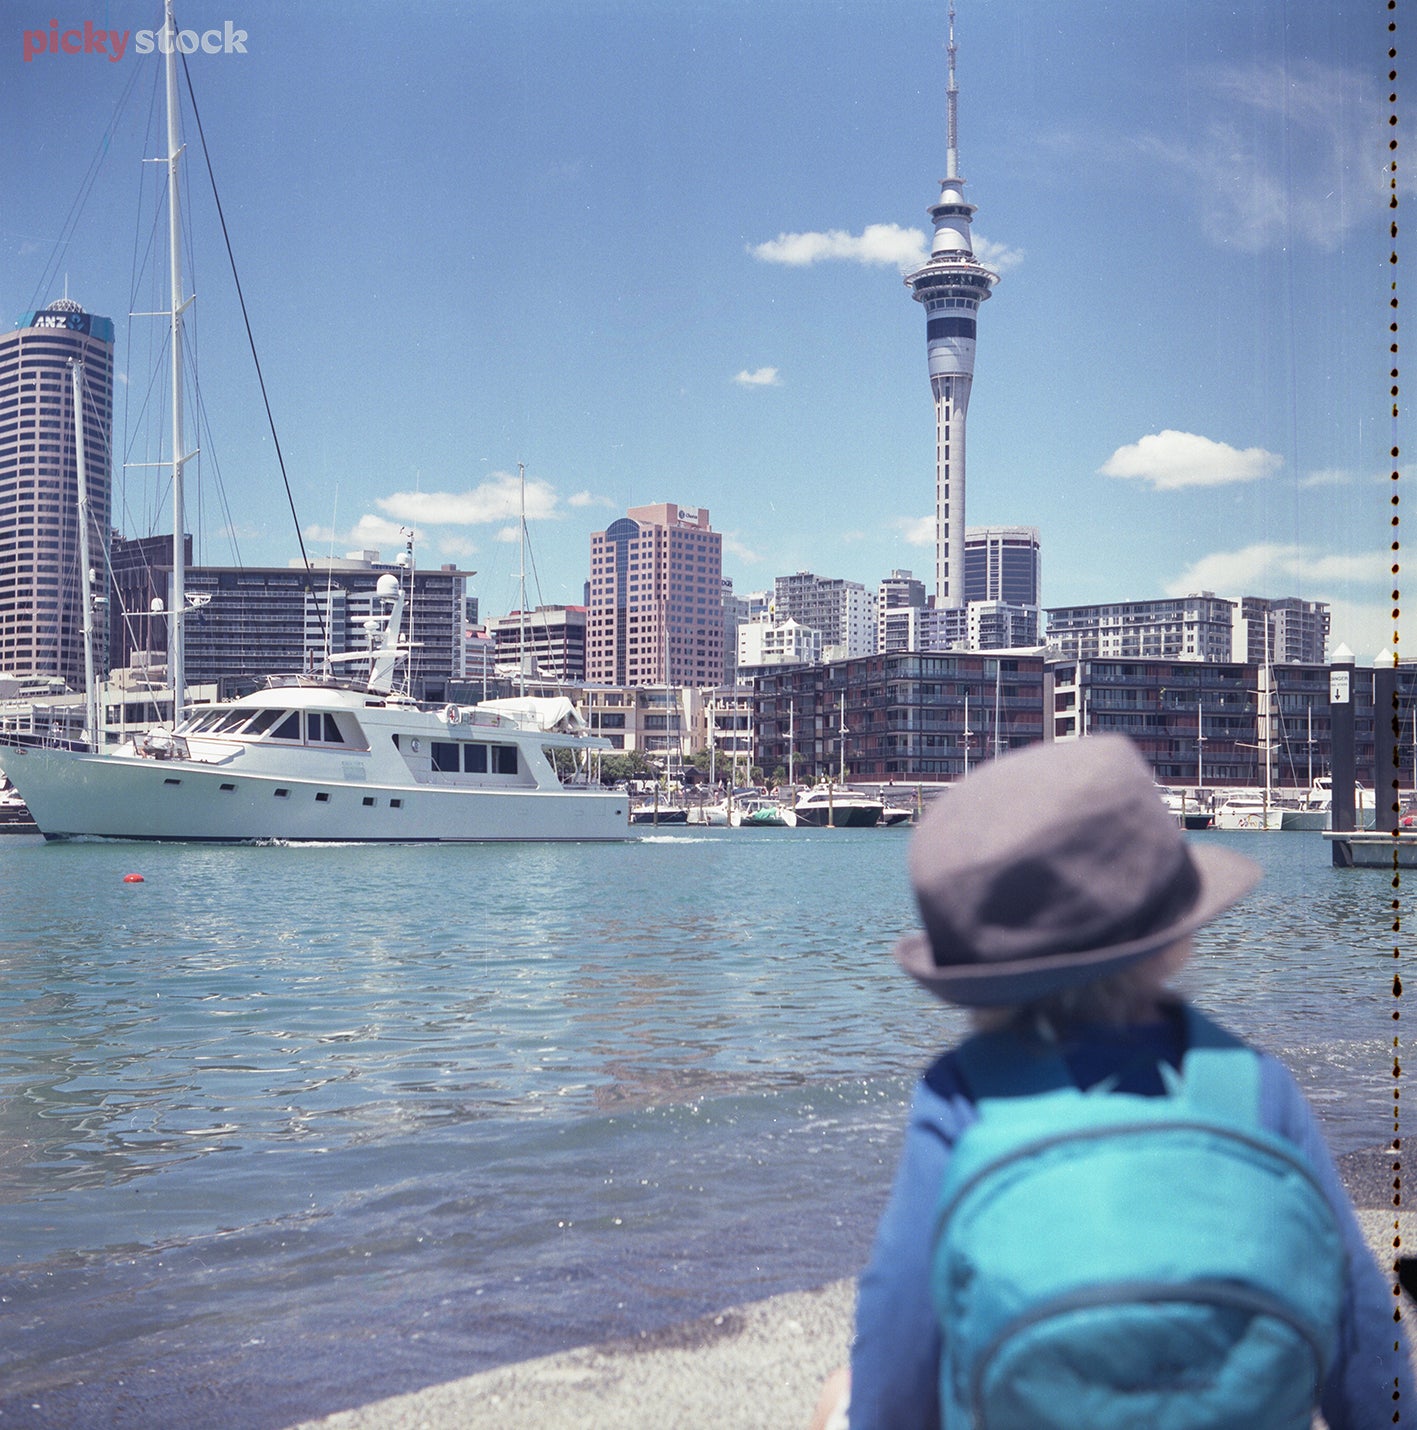 Small child wearing grey hat and blue backpack looking out over Tāmaki Makaurau's waterfront. Auckland waterfront is in view, with Sky Tower middle of frame. Sky is blue with a few clouds around. 